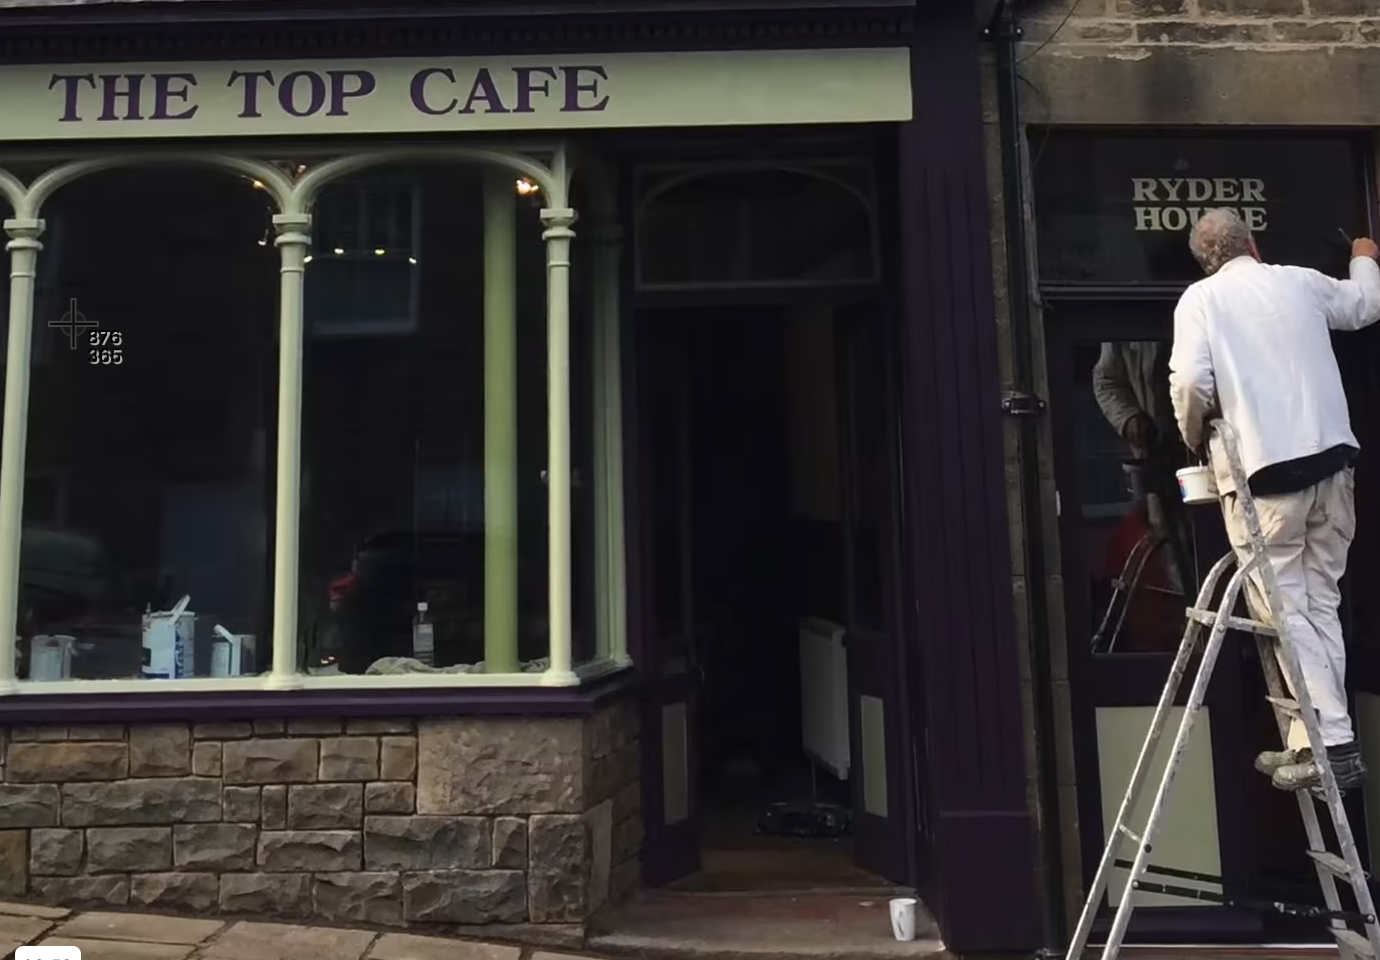 The Top Cafe and Ryder House